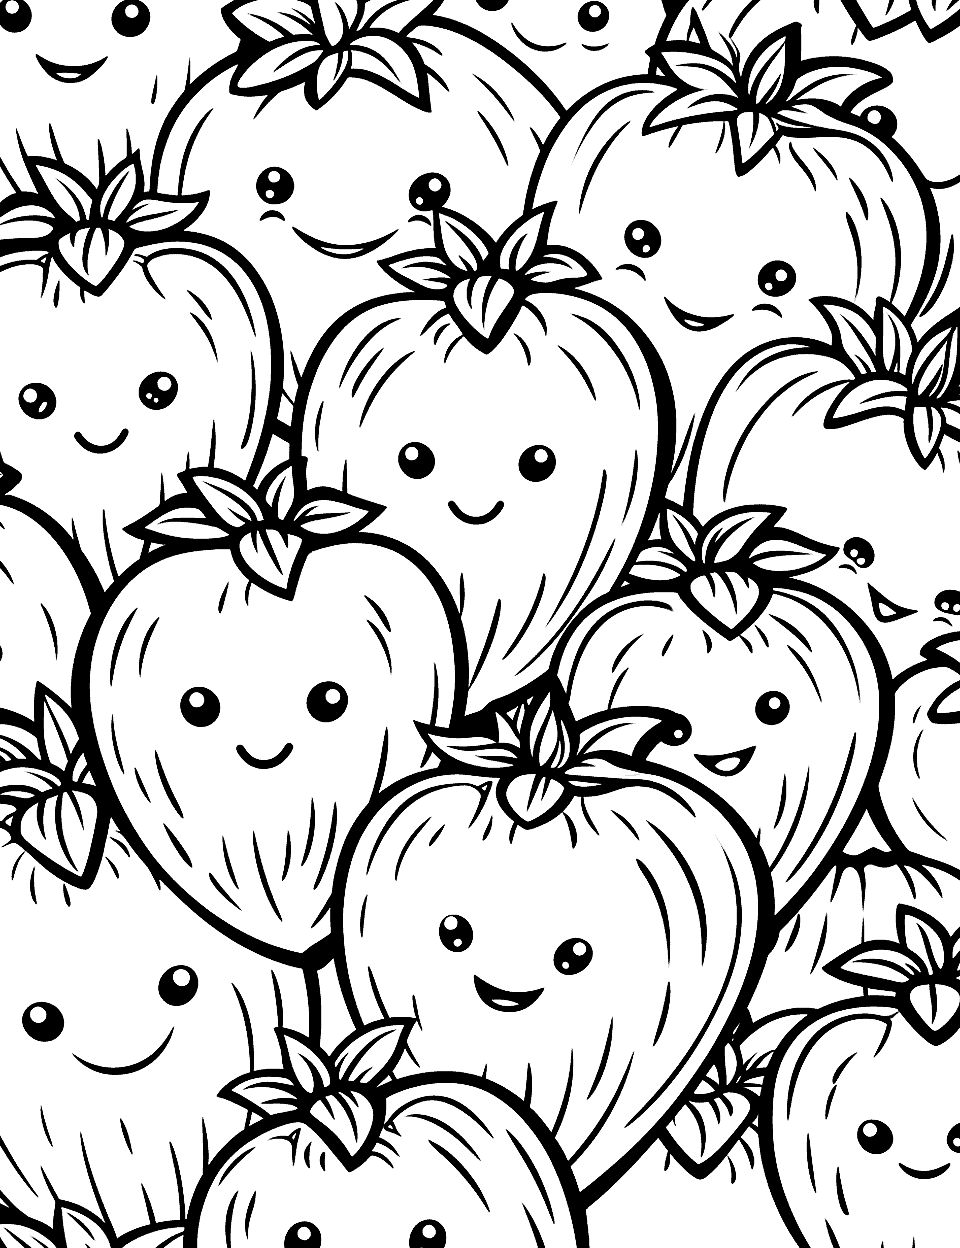 Strawberry Field Fun Fruit Coloring Page - A field of strawberries, each with a face and expression.